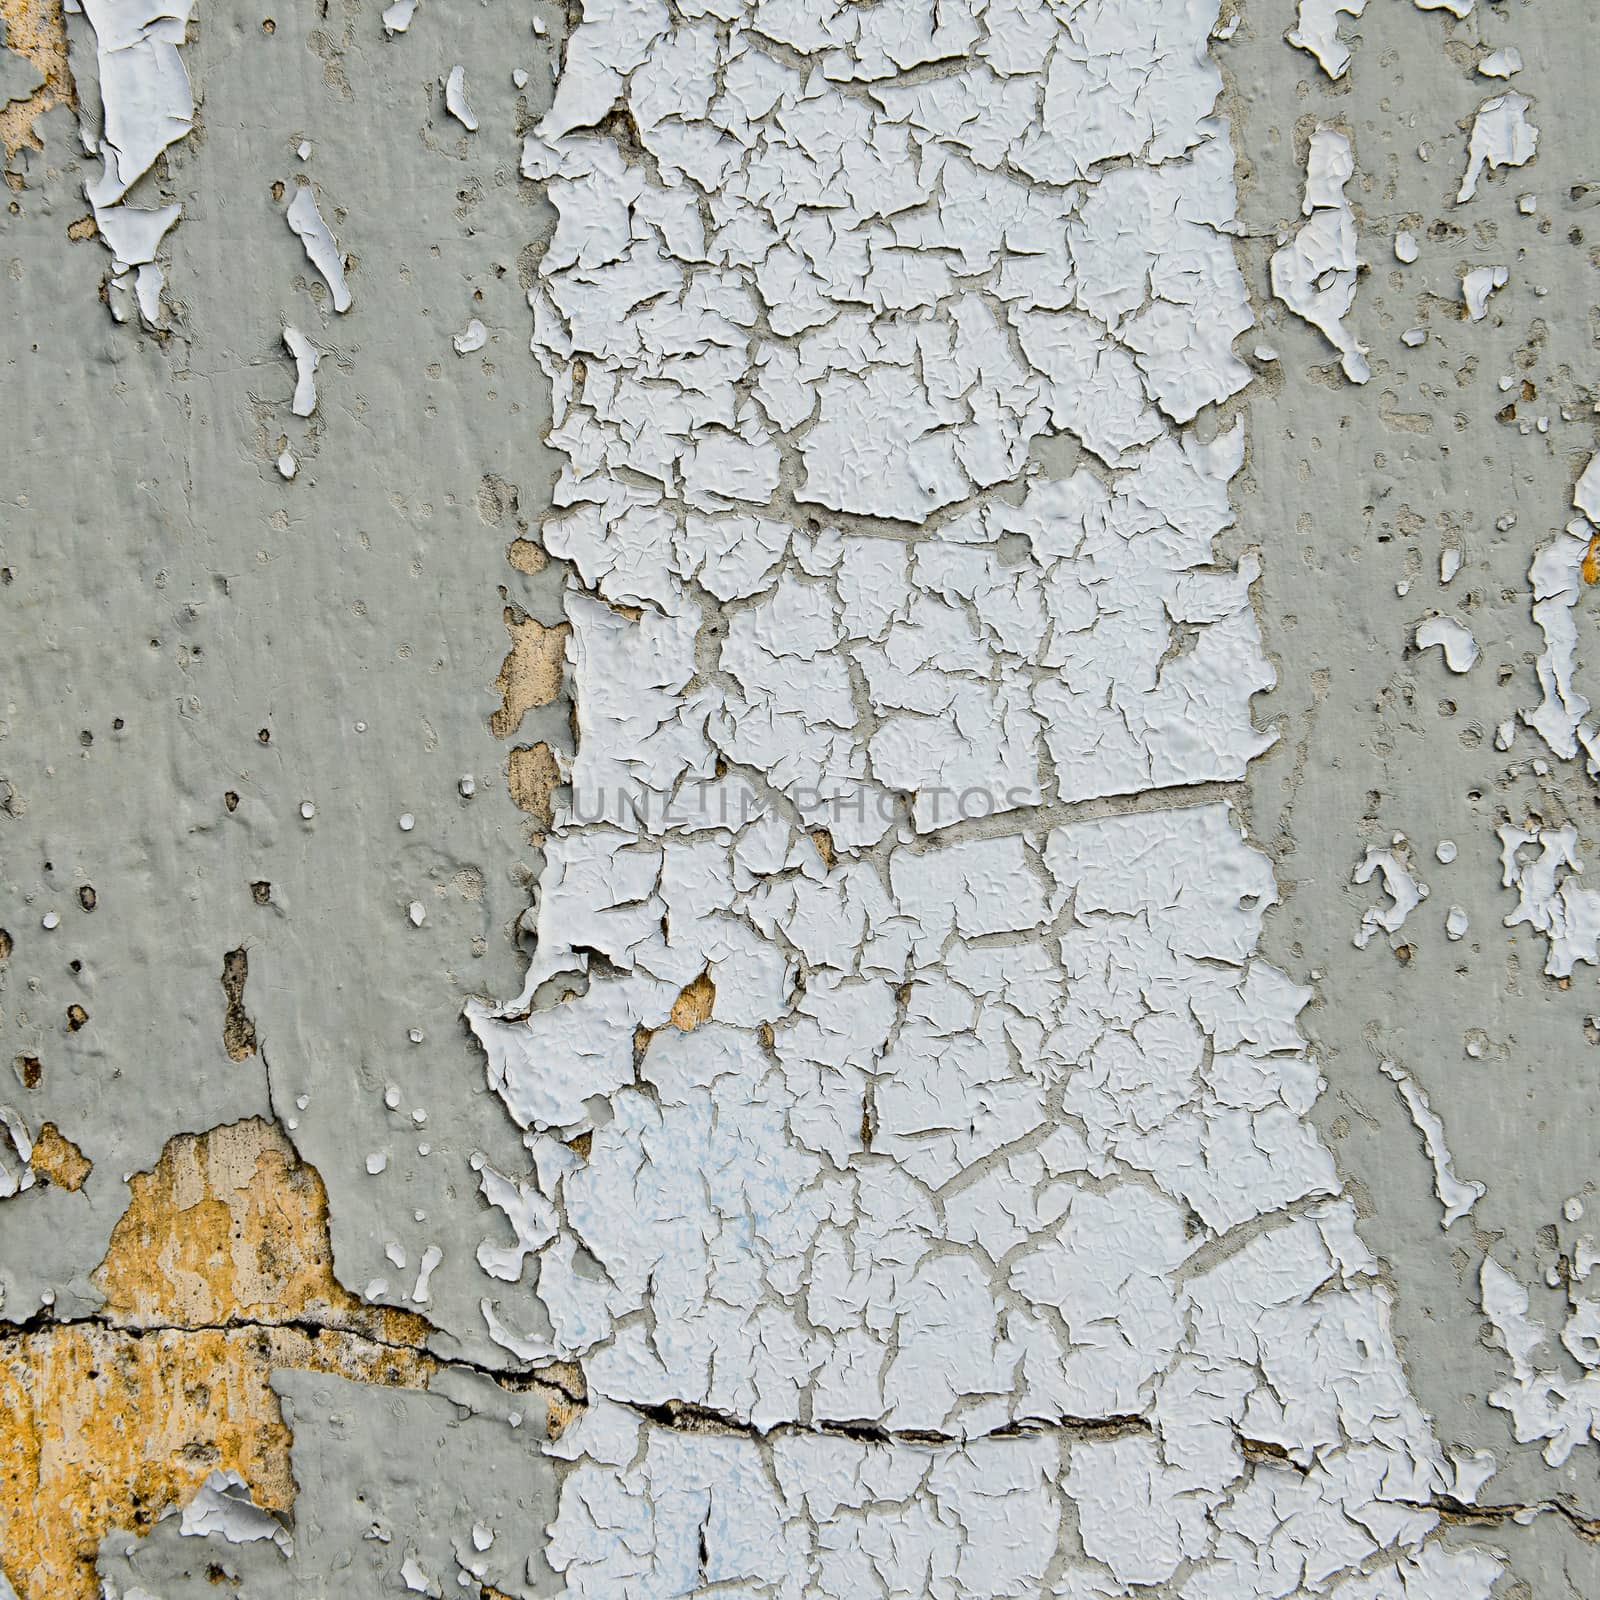 old cracked paint on the concrete wall 